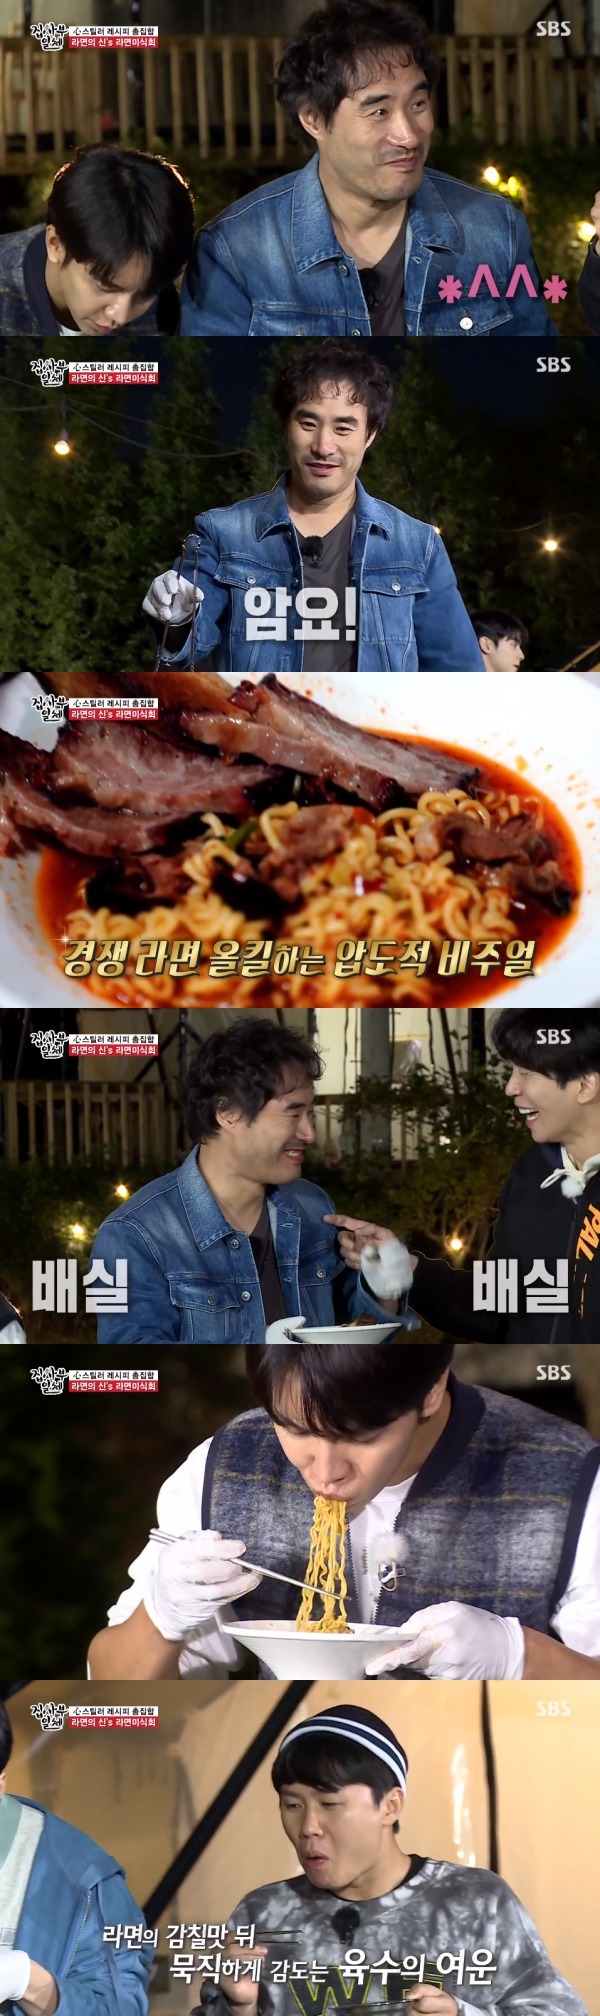 Seoul = Bae Seong-woo, who insisted on Pure Love Instant Noodle, fell into Galbi Instant Noodle, which Lee Seung-gi boiled.Actor Bae Seong-woo appeared on SBS All The Butlers broadcast on the afternoon of the 18th.On the day, Bae Seong-woo and the cast went camping; in the evening, an Instant Noodle cooking contest was held.Bae Seong-woo reveals she is confident in Instant Noodle dishHowever, Lee Seung-gi was suddenly darkened when he was burdened by the Instant Noodle.I think the Instant Noodle, which is close to the original intention, is the most delicious, Bae Seong-woo commented timidly.Bae Seong-woo announced that he would make Pure Love Instant Noodle with only green onions and eggs; while Lee Seung-gi has been in full preparation.It was the gabbit of the defensive seasoning. Bae Seong-woo, who tasted Galbi of Lee Seung-gi, showed the biggest reaction since the start of filming.It was Bae Seong-woo who was unfamiliar when it became a tent like Lee Seung-gi, but after eating Galbi of Lee Seung-gi, he made love Confessions.Lee Seung-gi was single-handed no matter what he did. After tasting the finished Instant Noodle, he expressed his taste as 5000 won.Other members also admired it, saying, This is a scam.